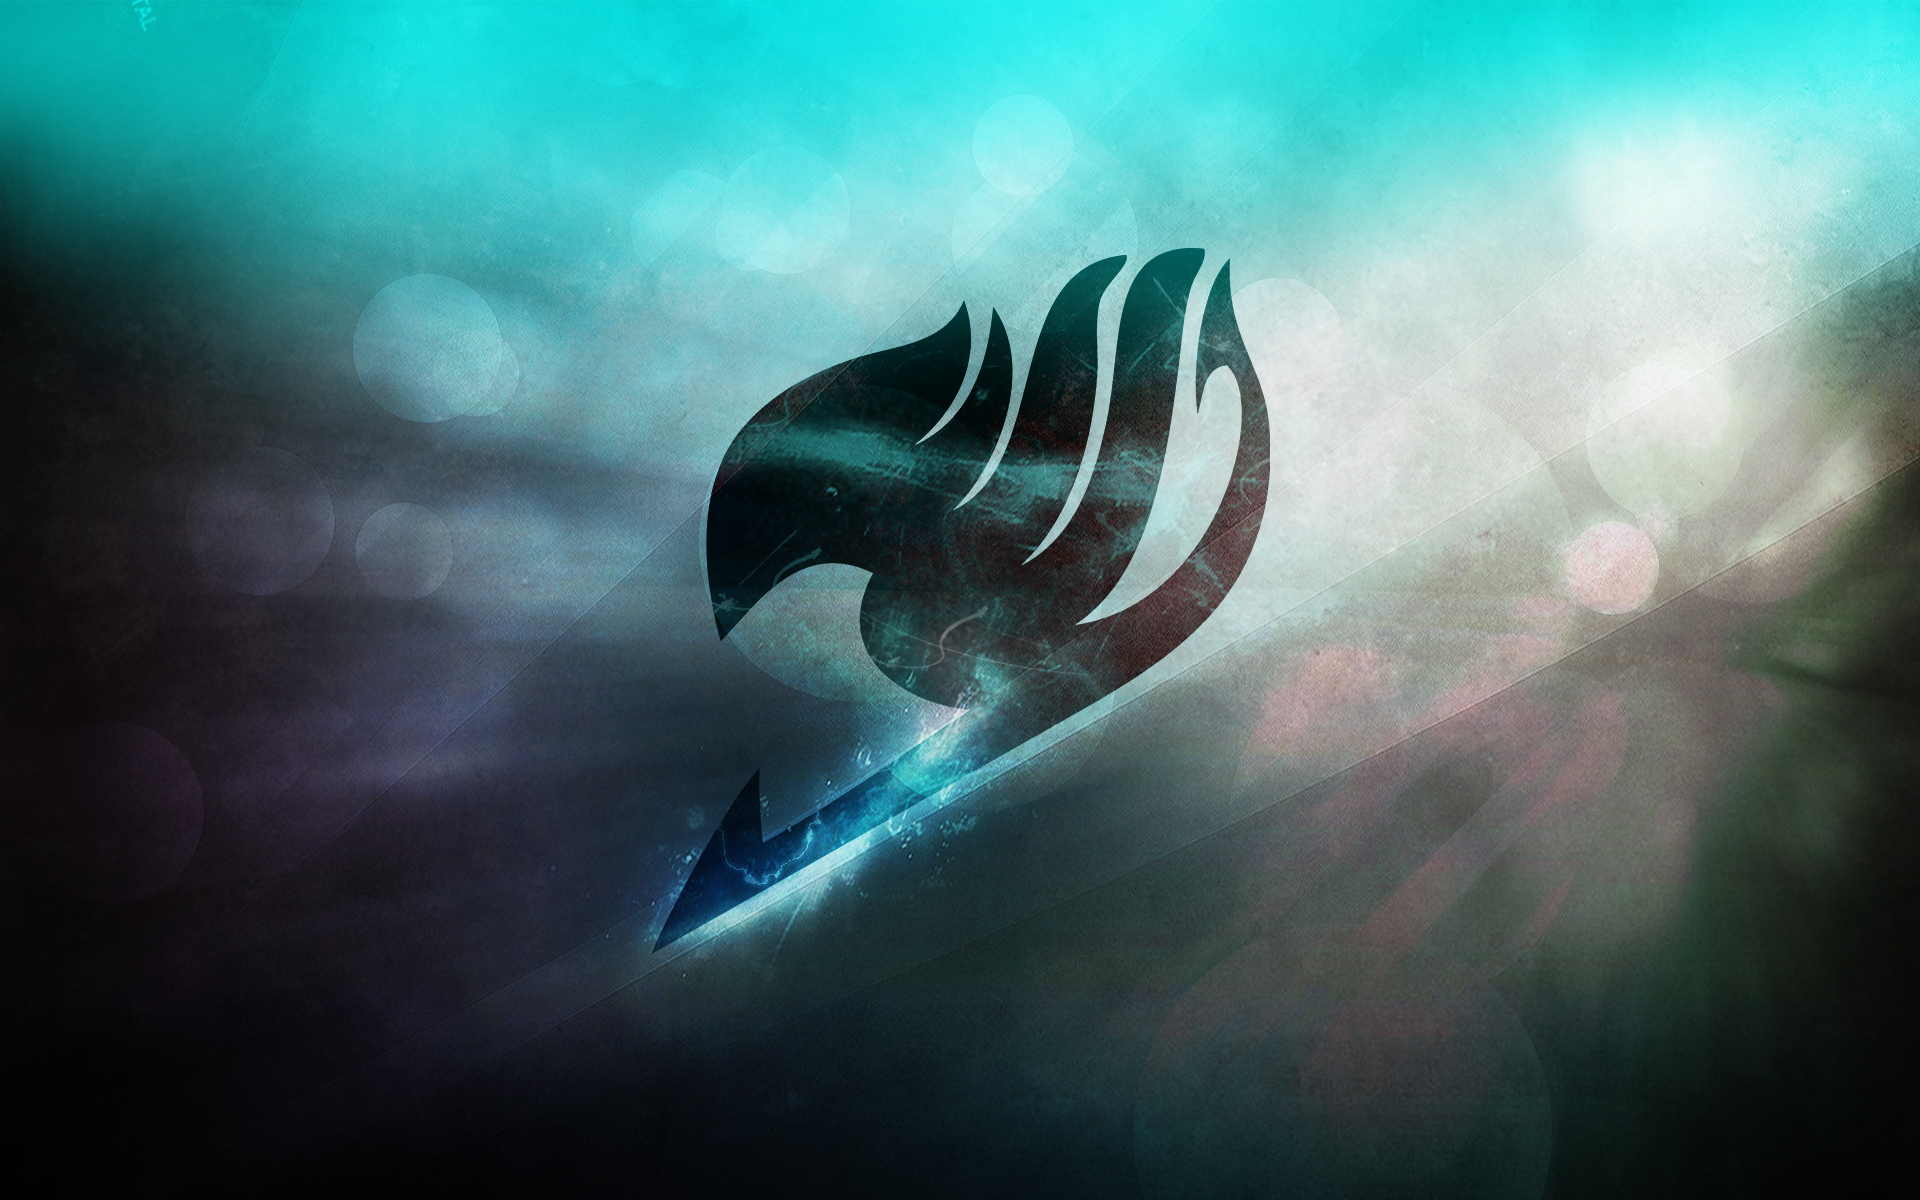 1131x707 top fairy tail logo hd hd wallpapers for your computer background · 1024x576 fairy tail logo wallpapers · 1920x1080 fairy tail logo wallpaper fairy tail . 72 Fairy Tail Logo Wallpaper On Wallpapersafari